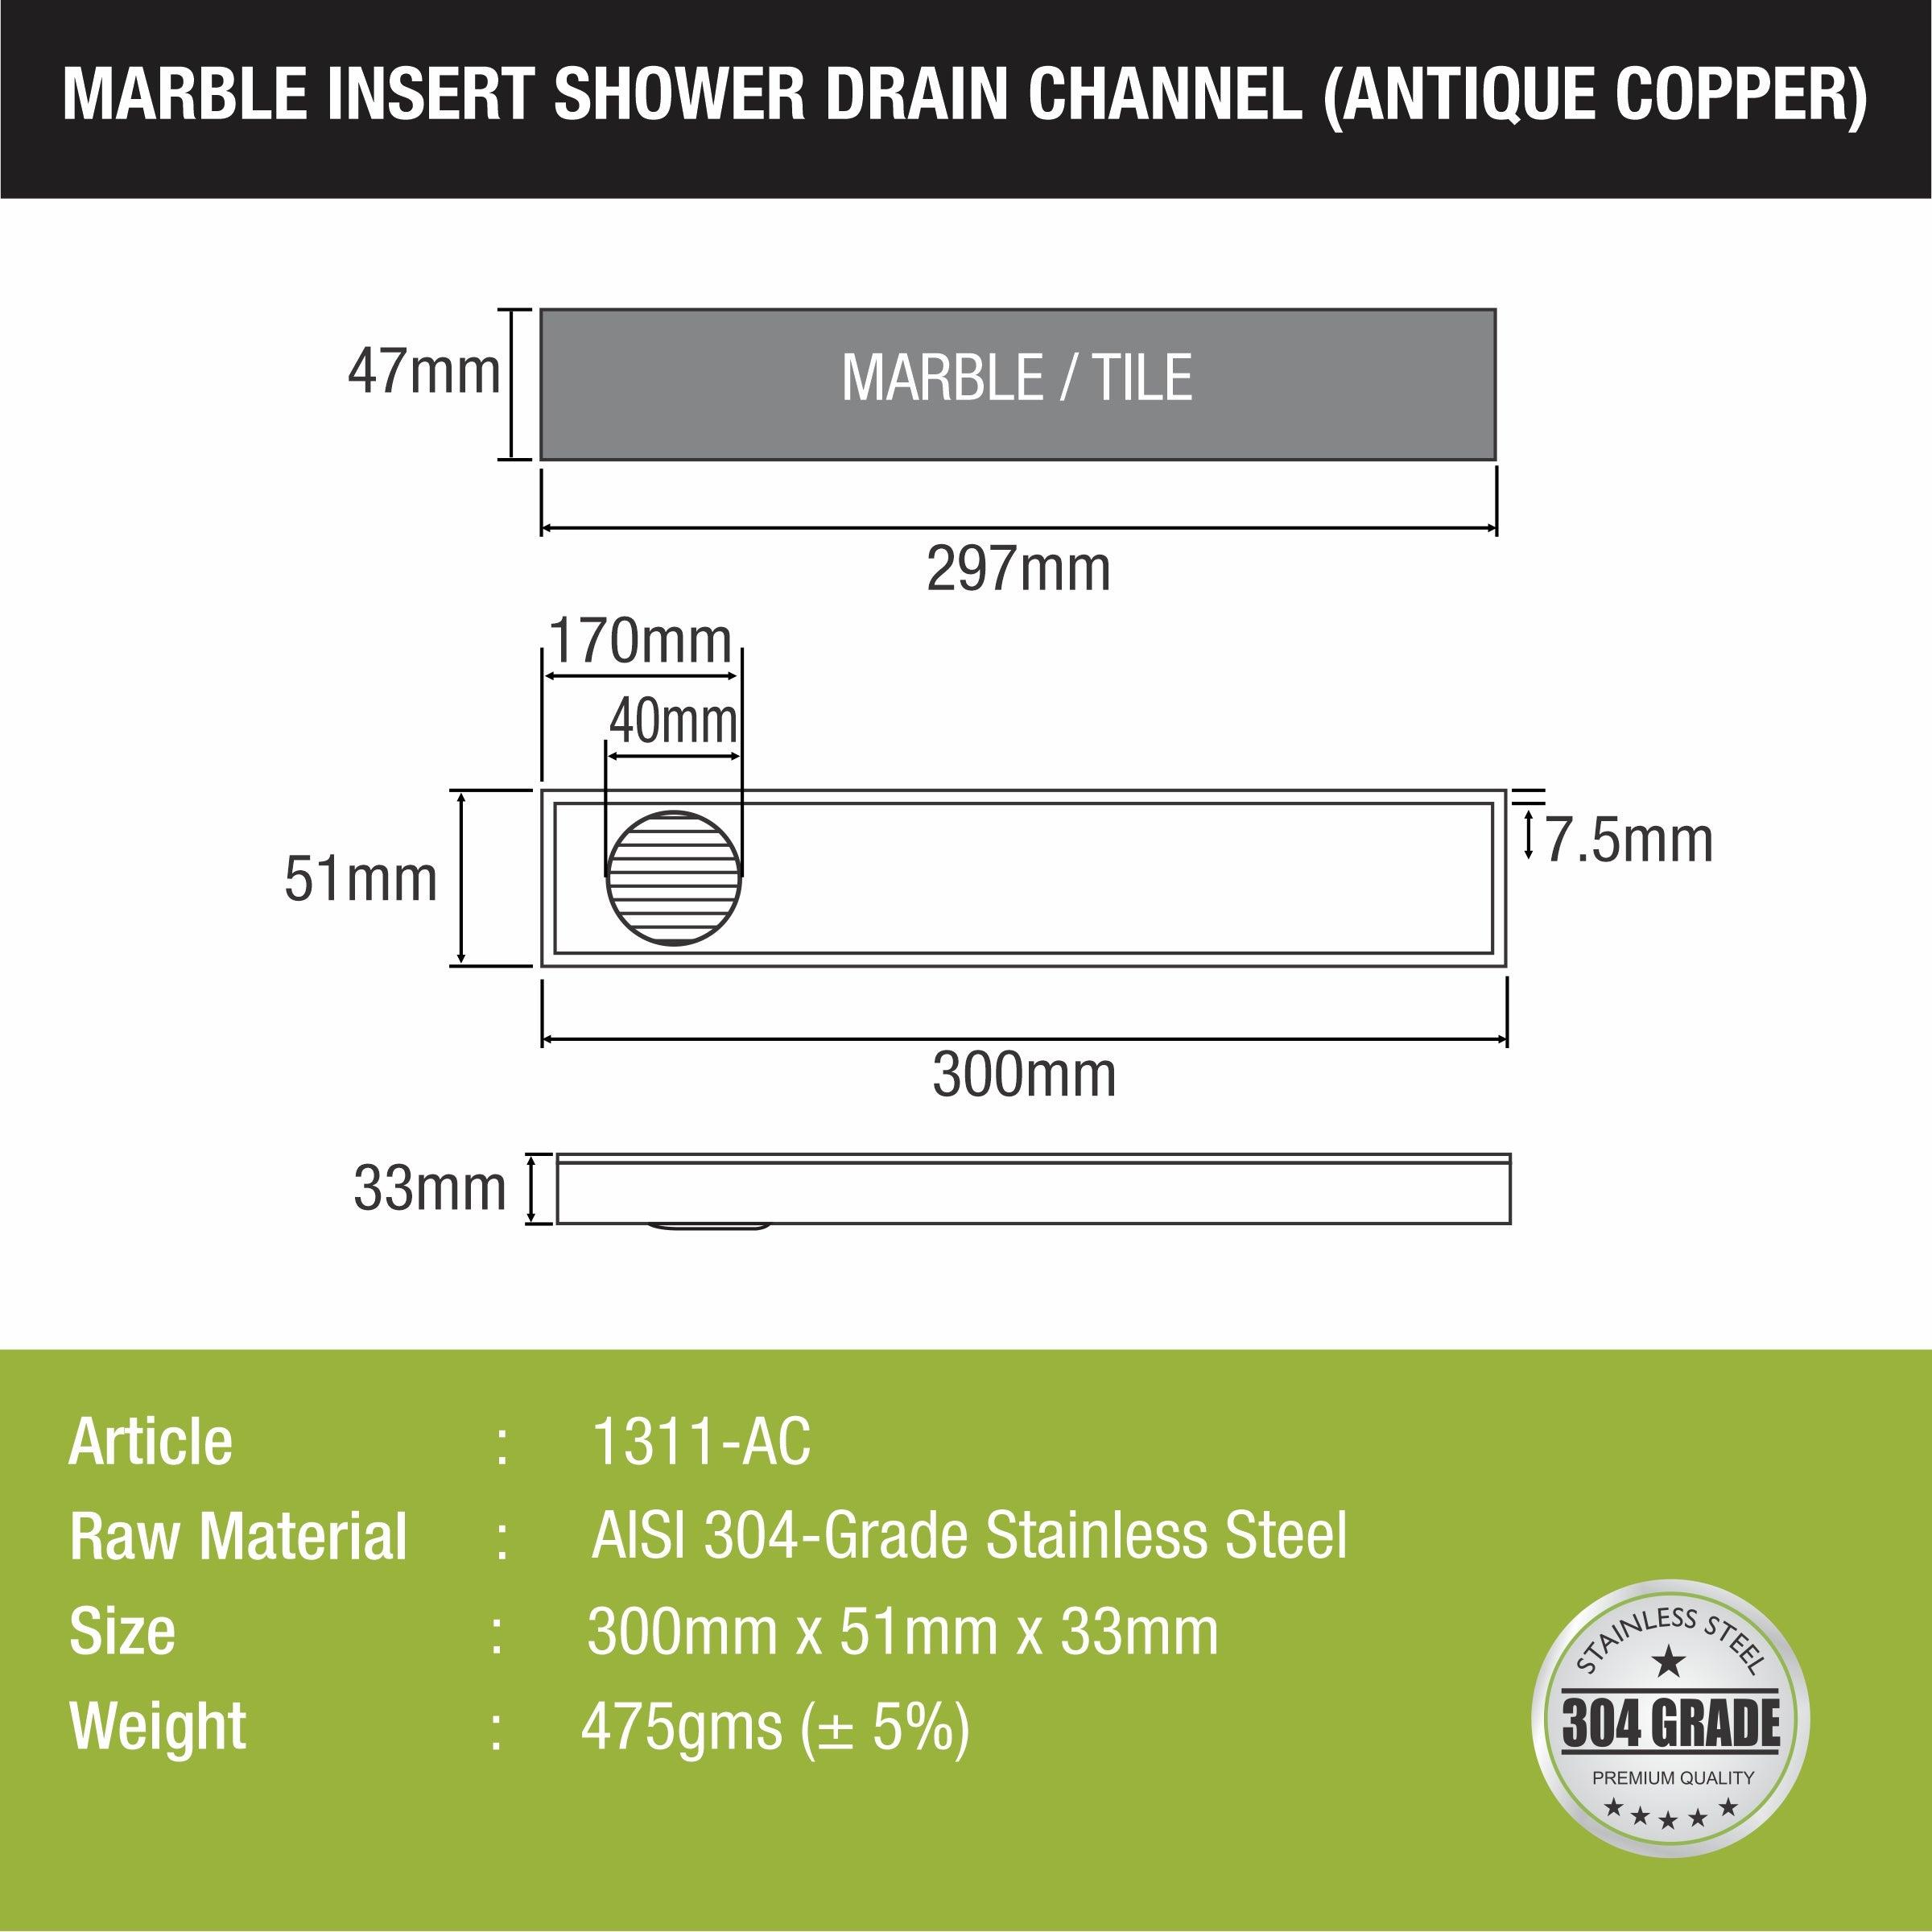 Marble Insert Shower Drain Channel - Antique Copper (12 x 2 Inches) sizes and dimensions